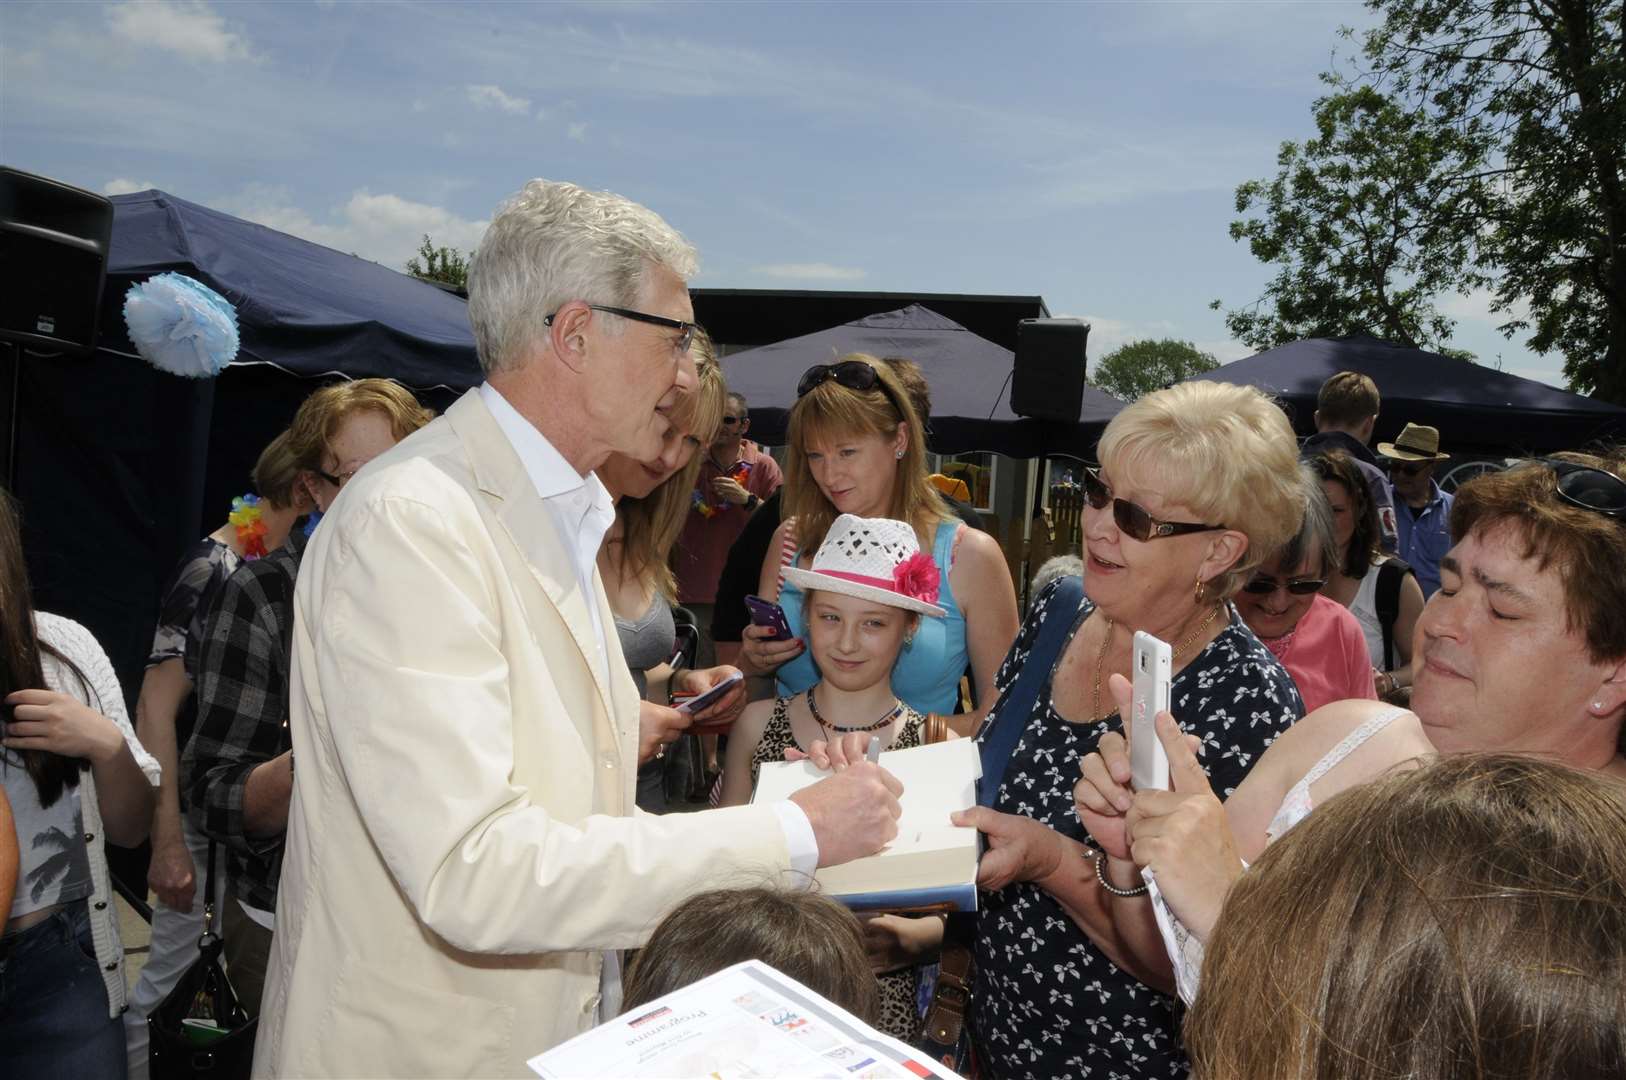 Paul O'Grady signs autographs after opening a fête close to his Kent home